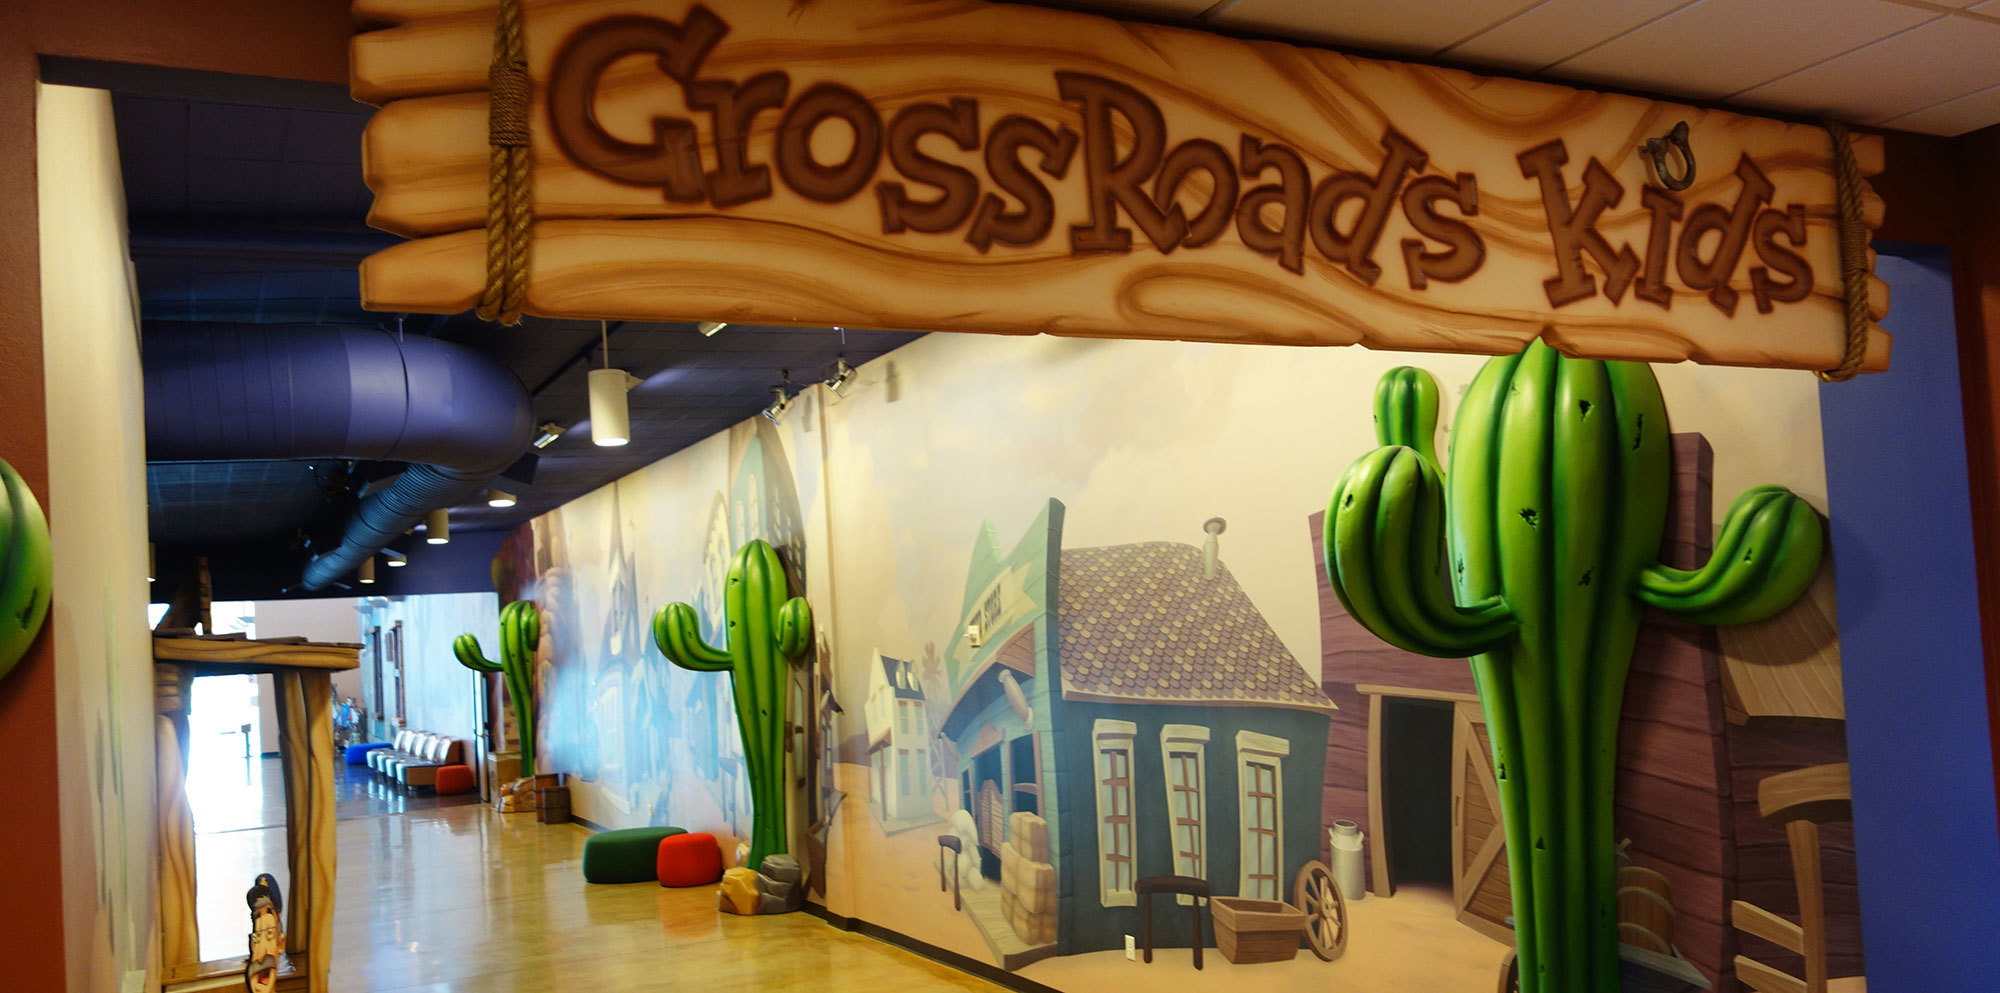 Western Themed Space with 3D cacti, wall murals of old west buildings and a sign reading "Crossroad's Kids" in a faux wood style at Crossroads Church TX